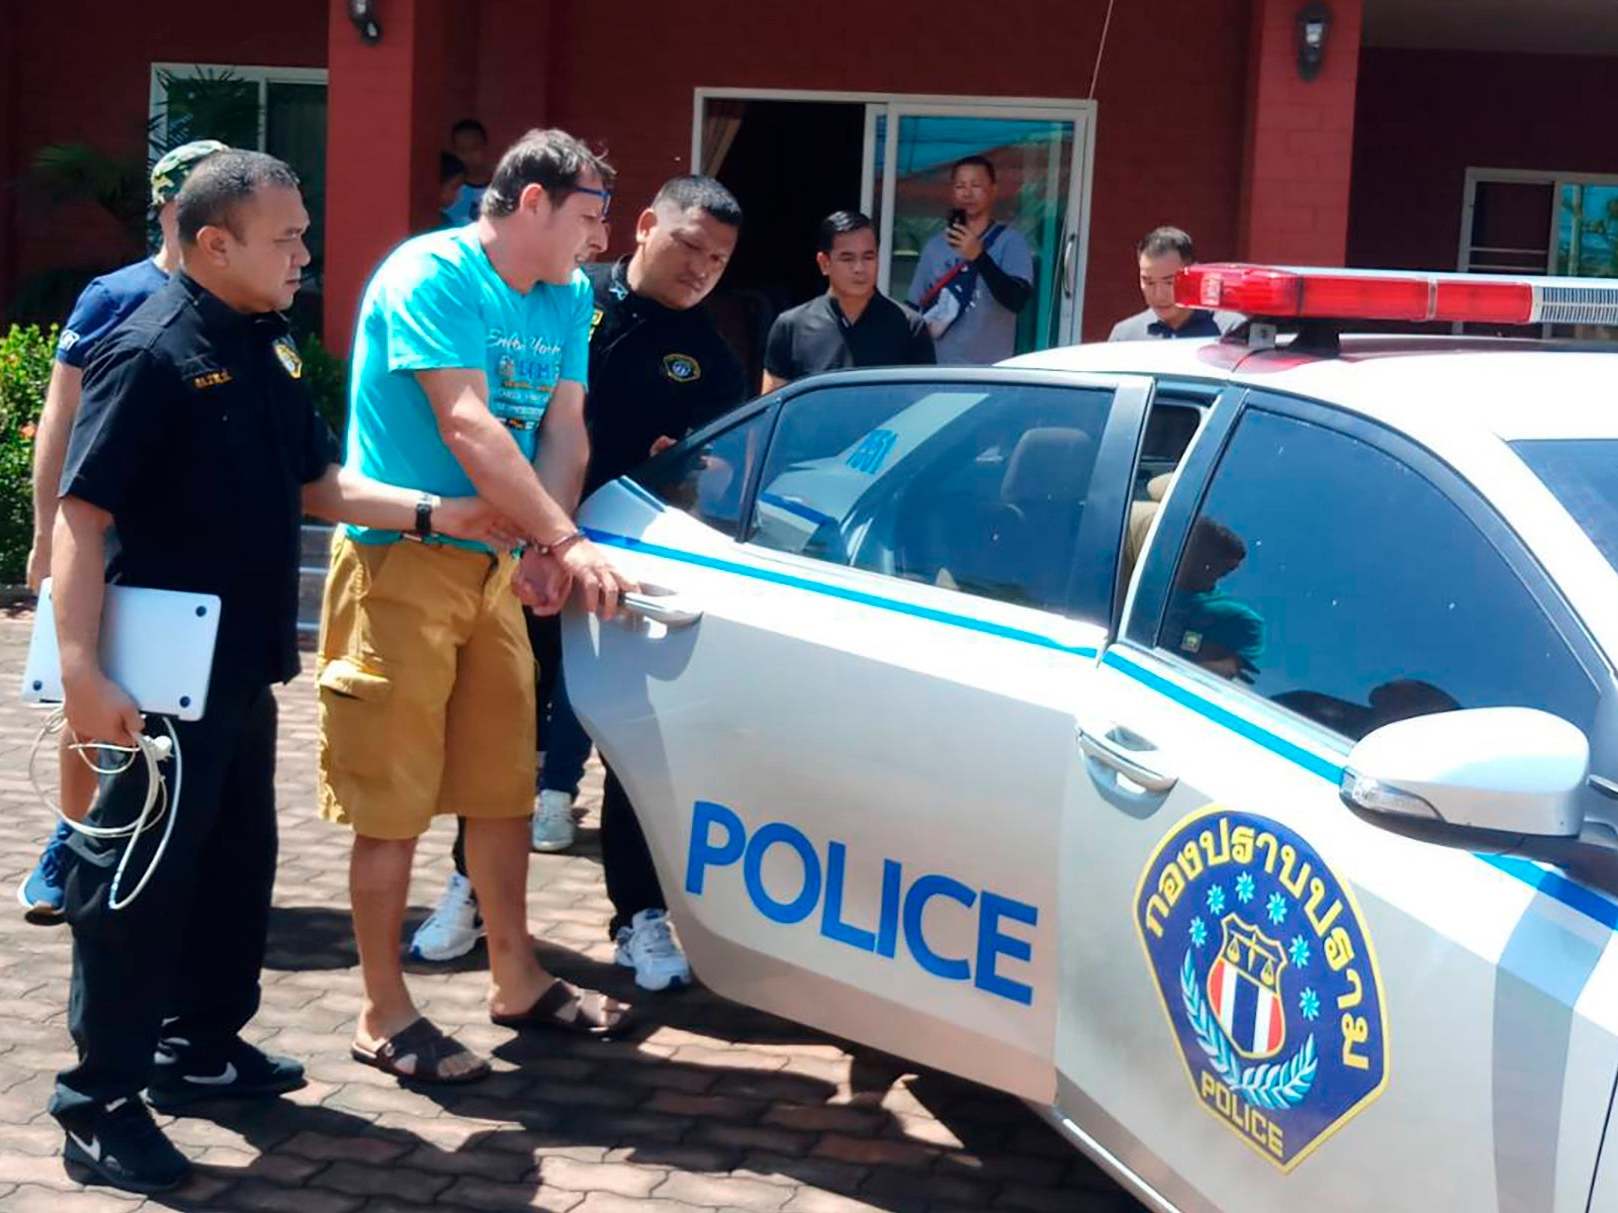 Italian jail escapee Francesco Galdeli, who used George Clooney's name to con investors, is detained by Thai police officers at a house in Chonburi